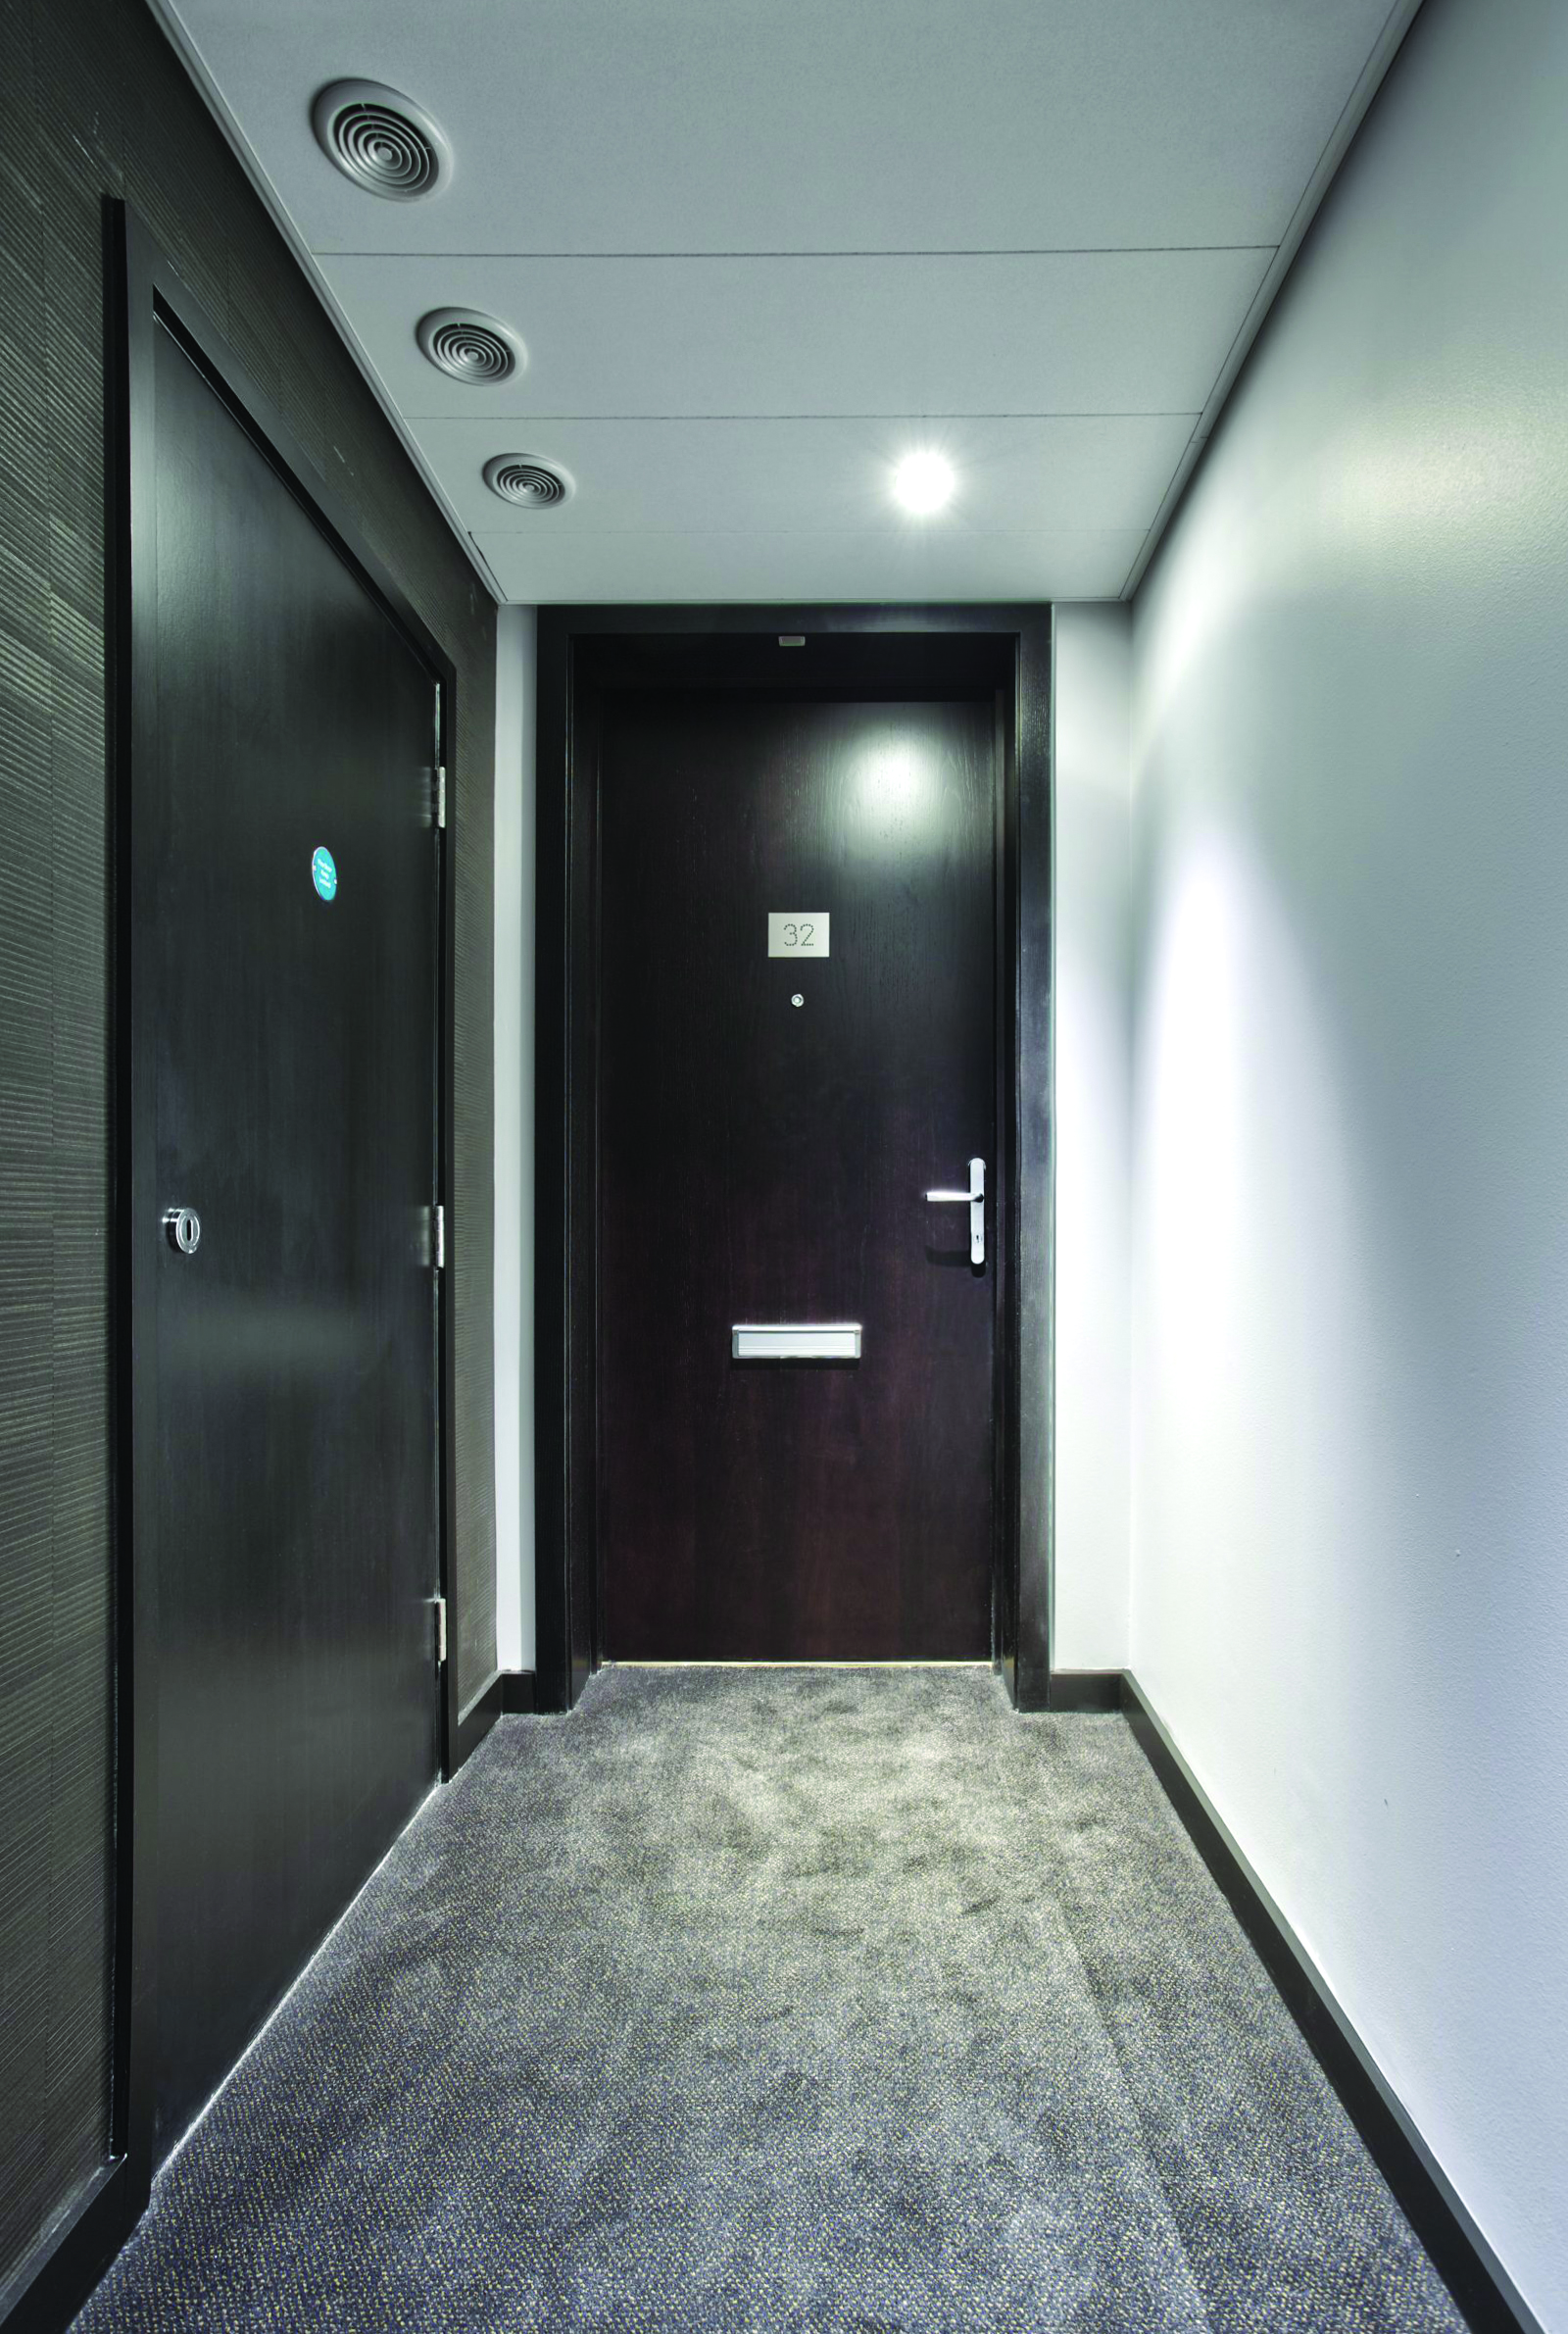 Ahmarra Achieve Dual Certification for Fire and Security for Flat Entrance Doorsets